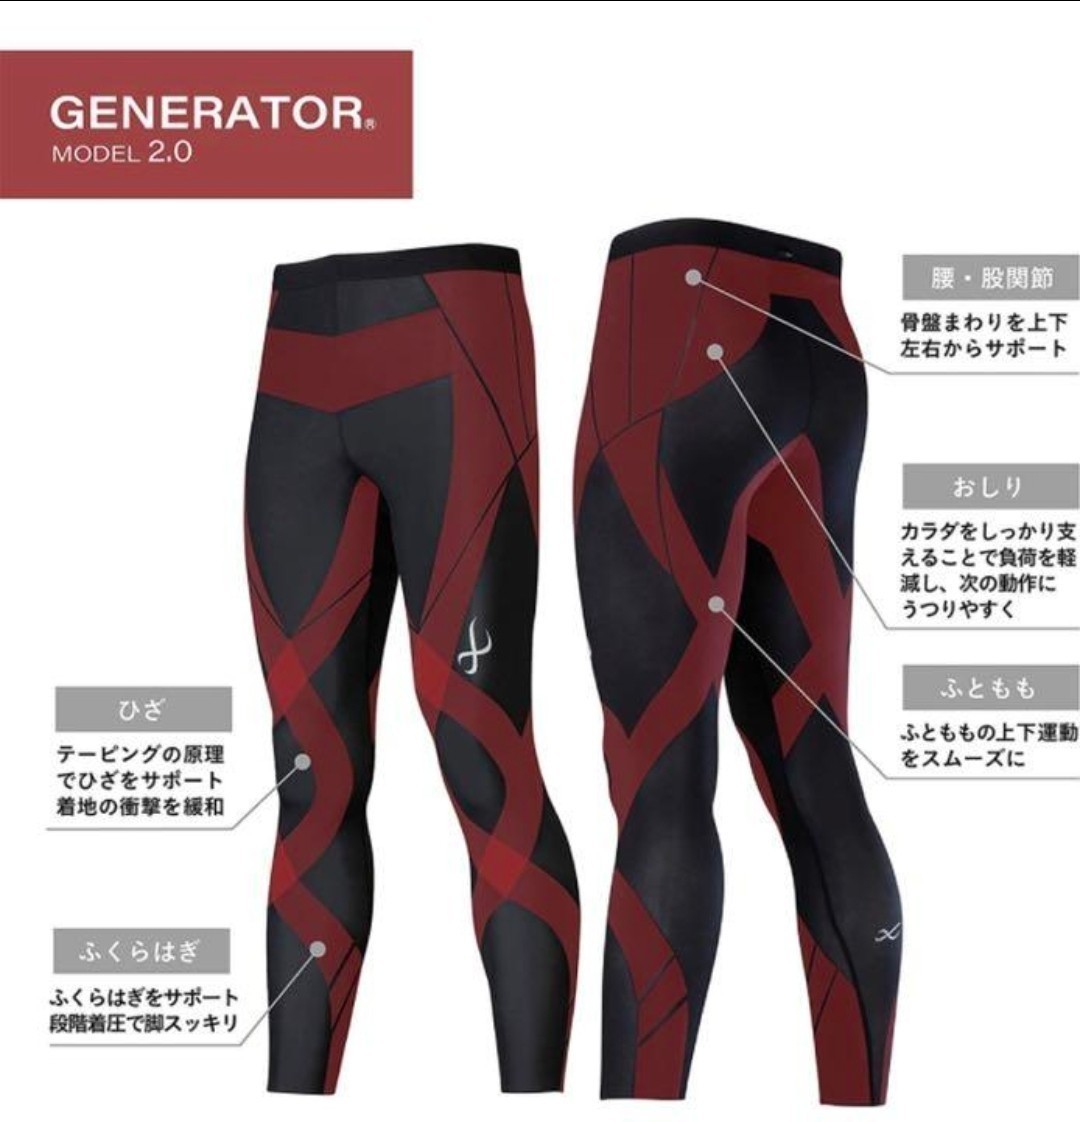  new goods unused! Wacoal CW-X lady's L HZY279 generator 2.0 sport tights long tights for women running ichi low 